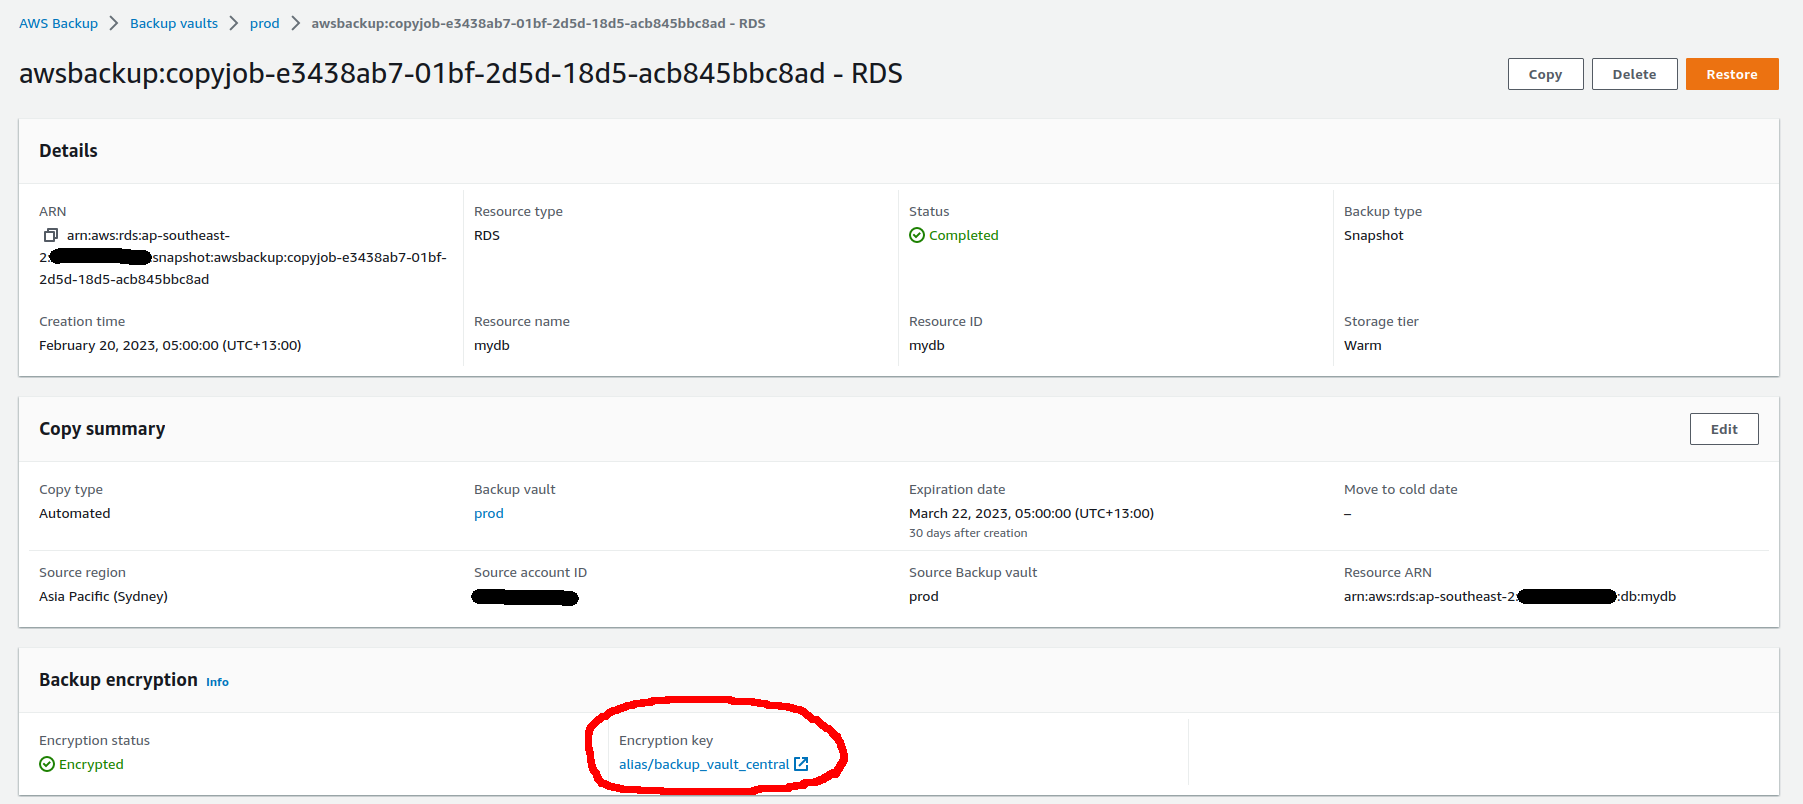 Snapshot encryption for RDS in the destinationaccount